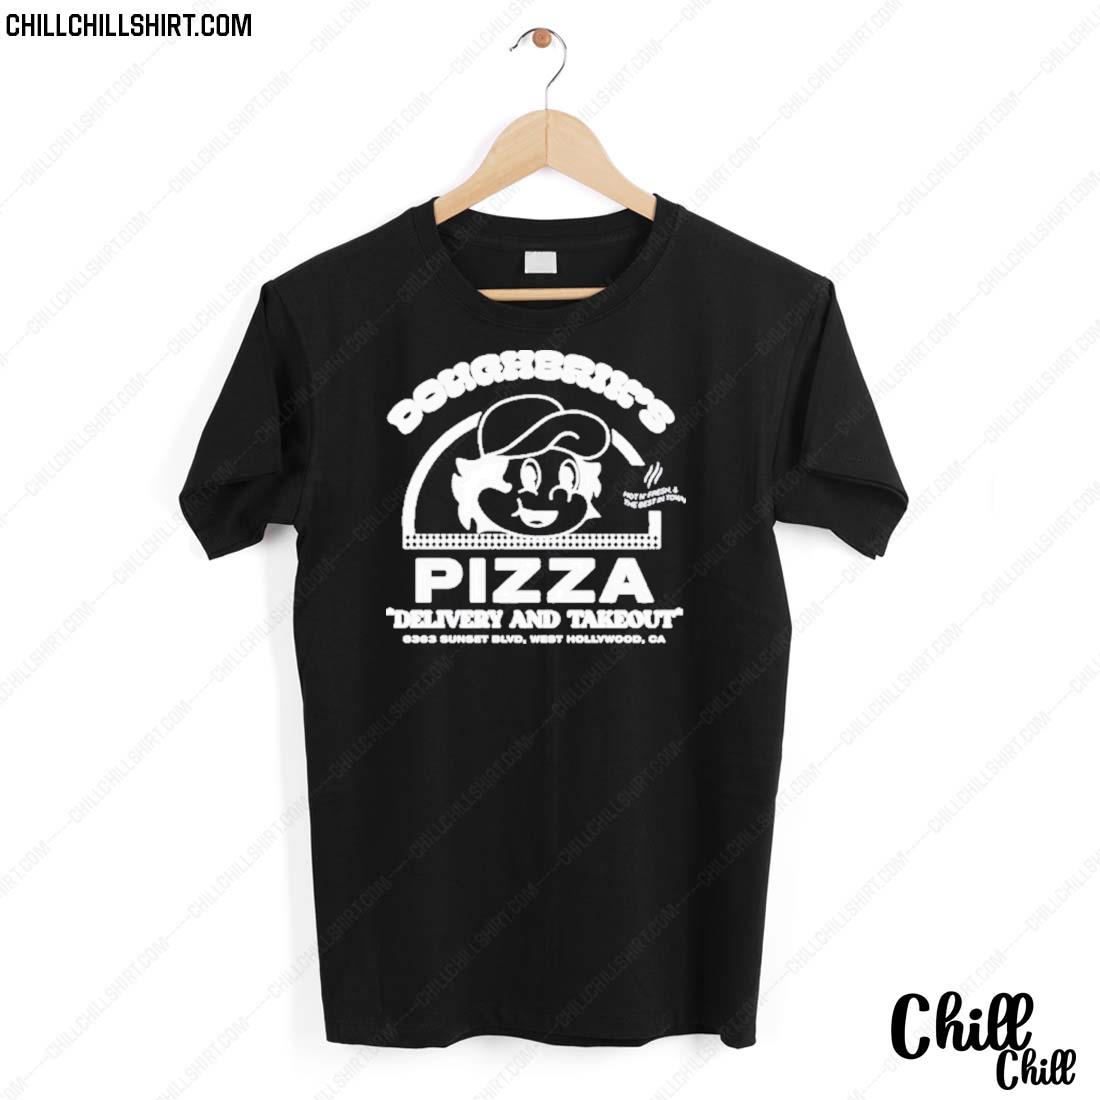 Nice doughbriks Pizza Delivery And Takeout T-shirt